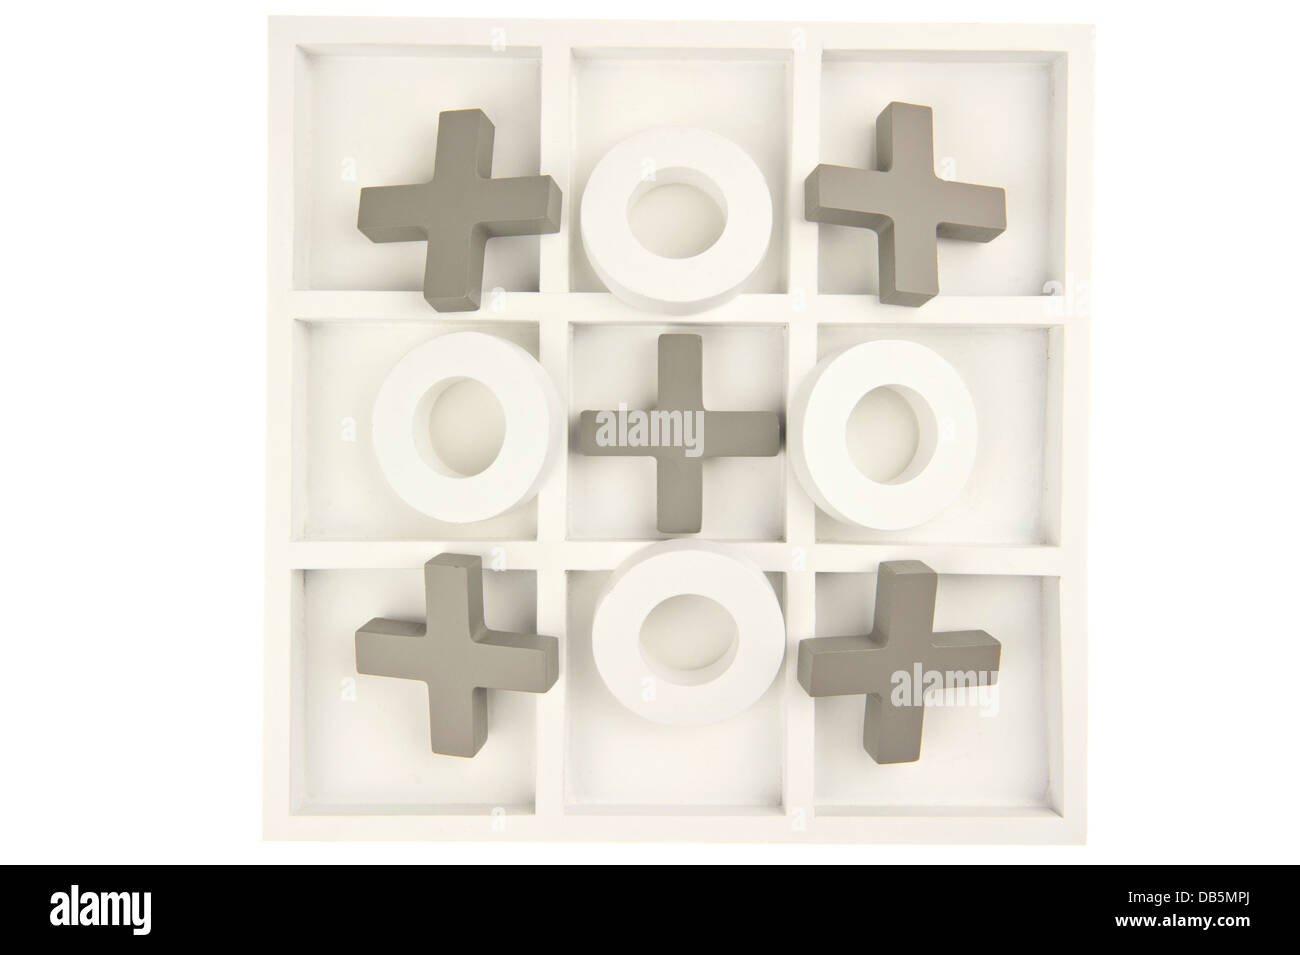 Wooden noughts and crosses game board in gray and white colors and playing stones ornate in cross shape and isolated Stock Photo